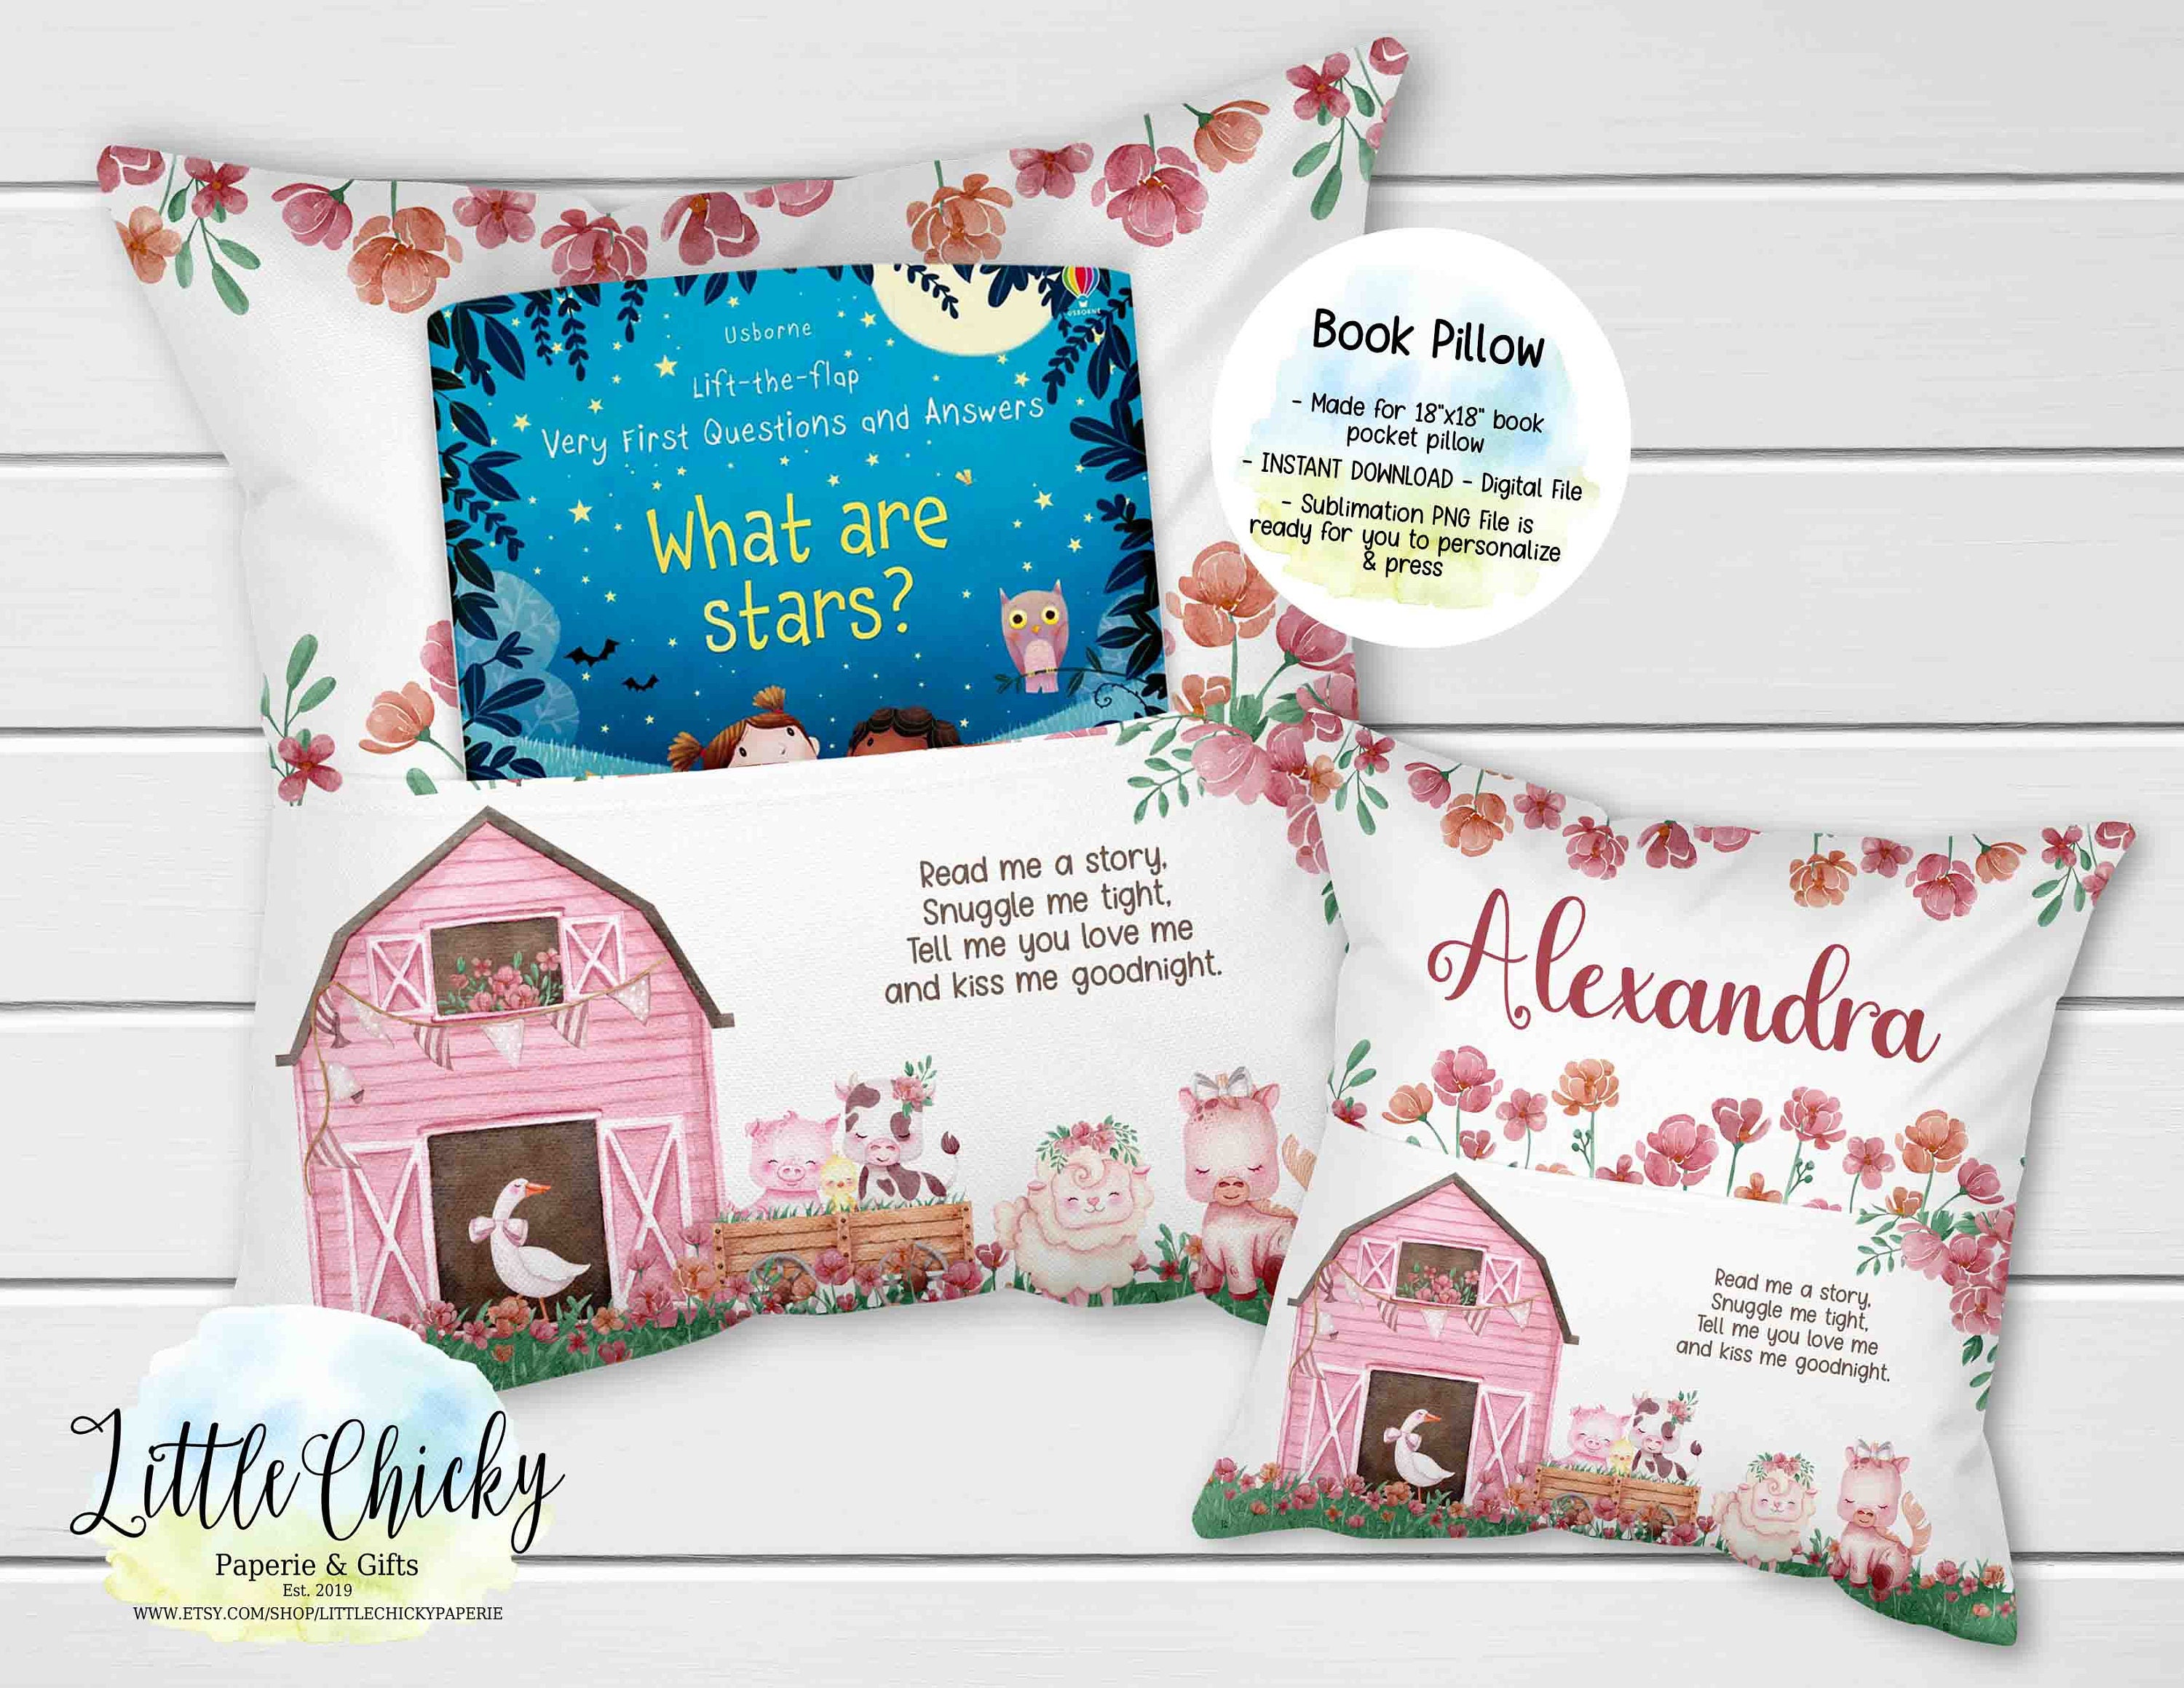 Personalized Reading Book Pillow, Custom Book Pillow, Reader Pillow, Bookish  Decor. Home Library Pillow, Bookish Pillow, Book Home Decor 